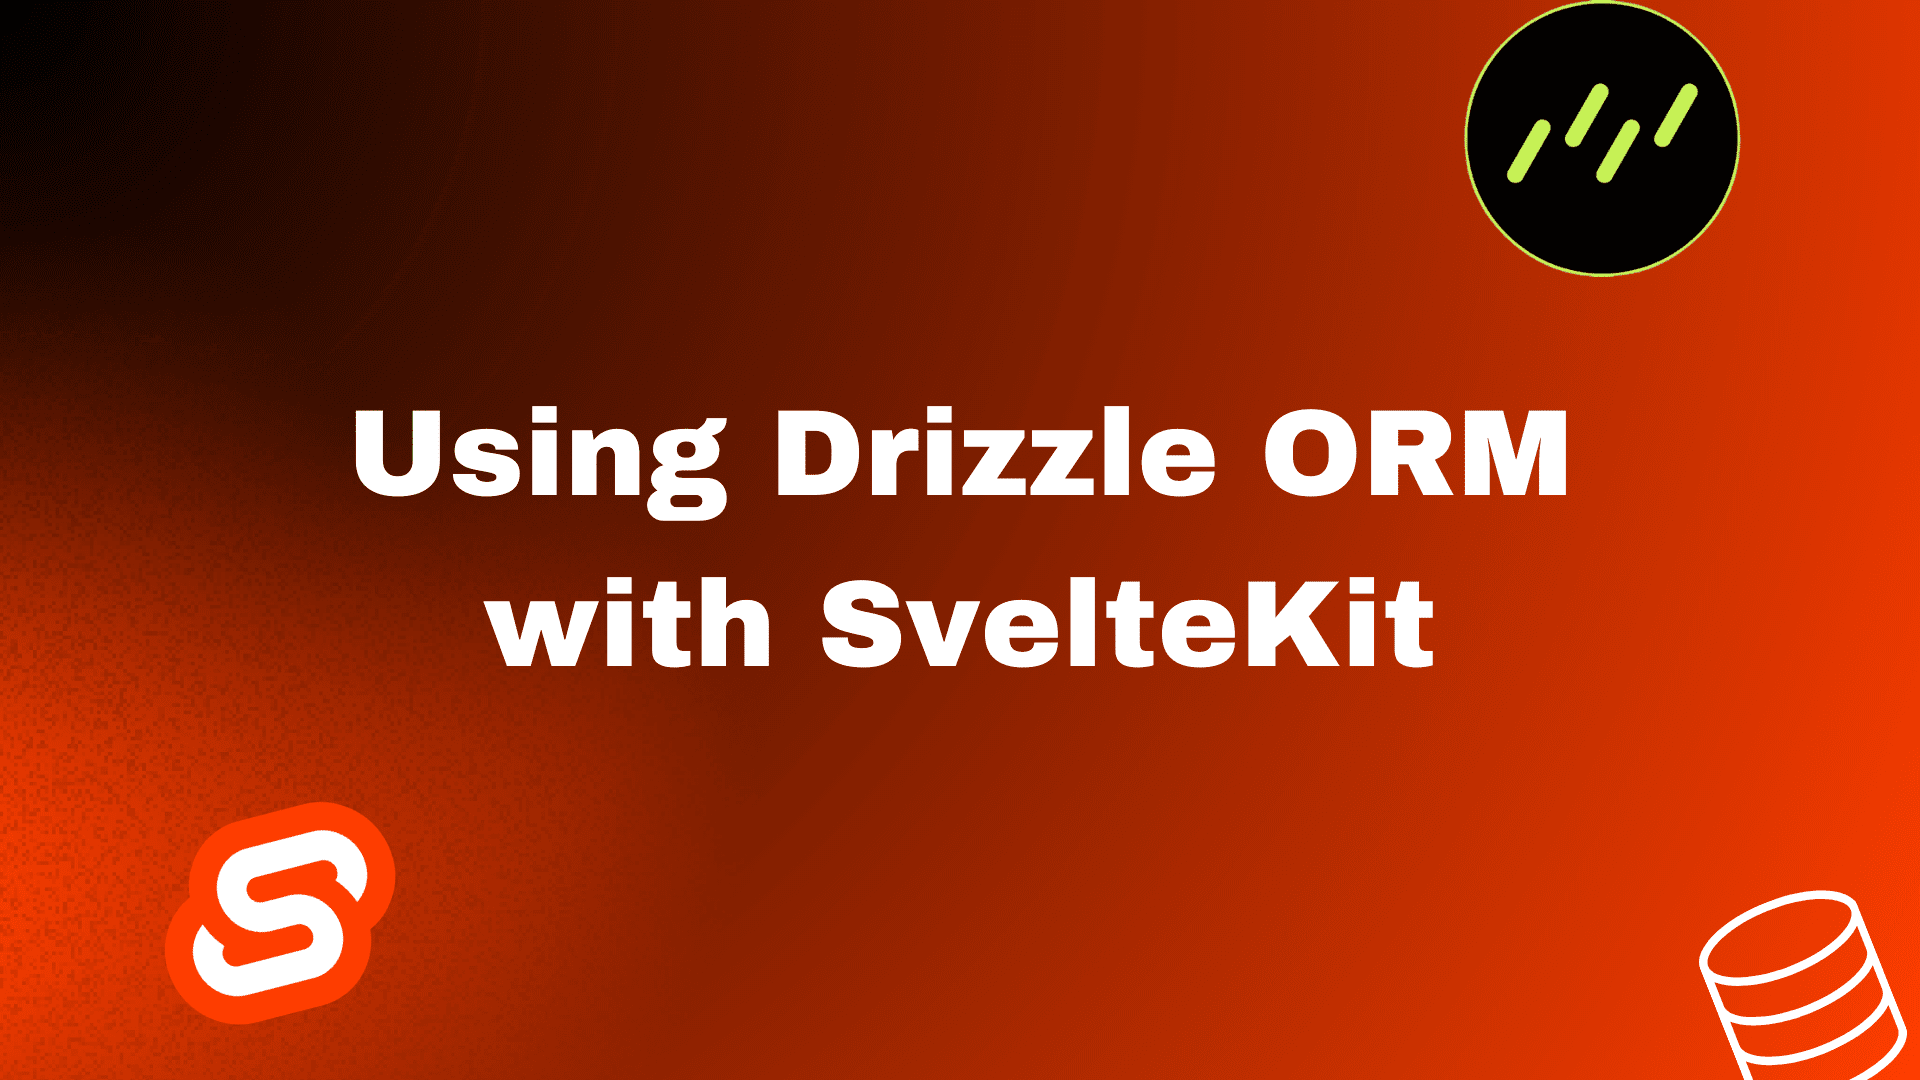 Using Drizzle ORM with SvelteKit